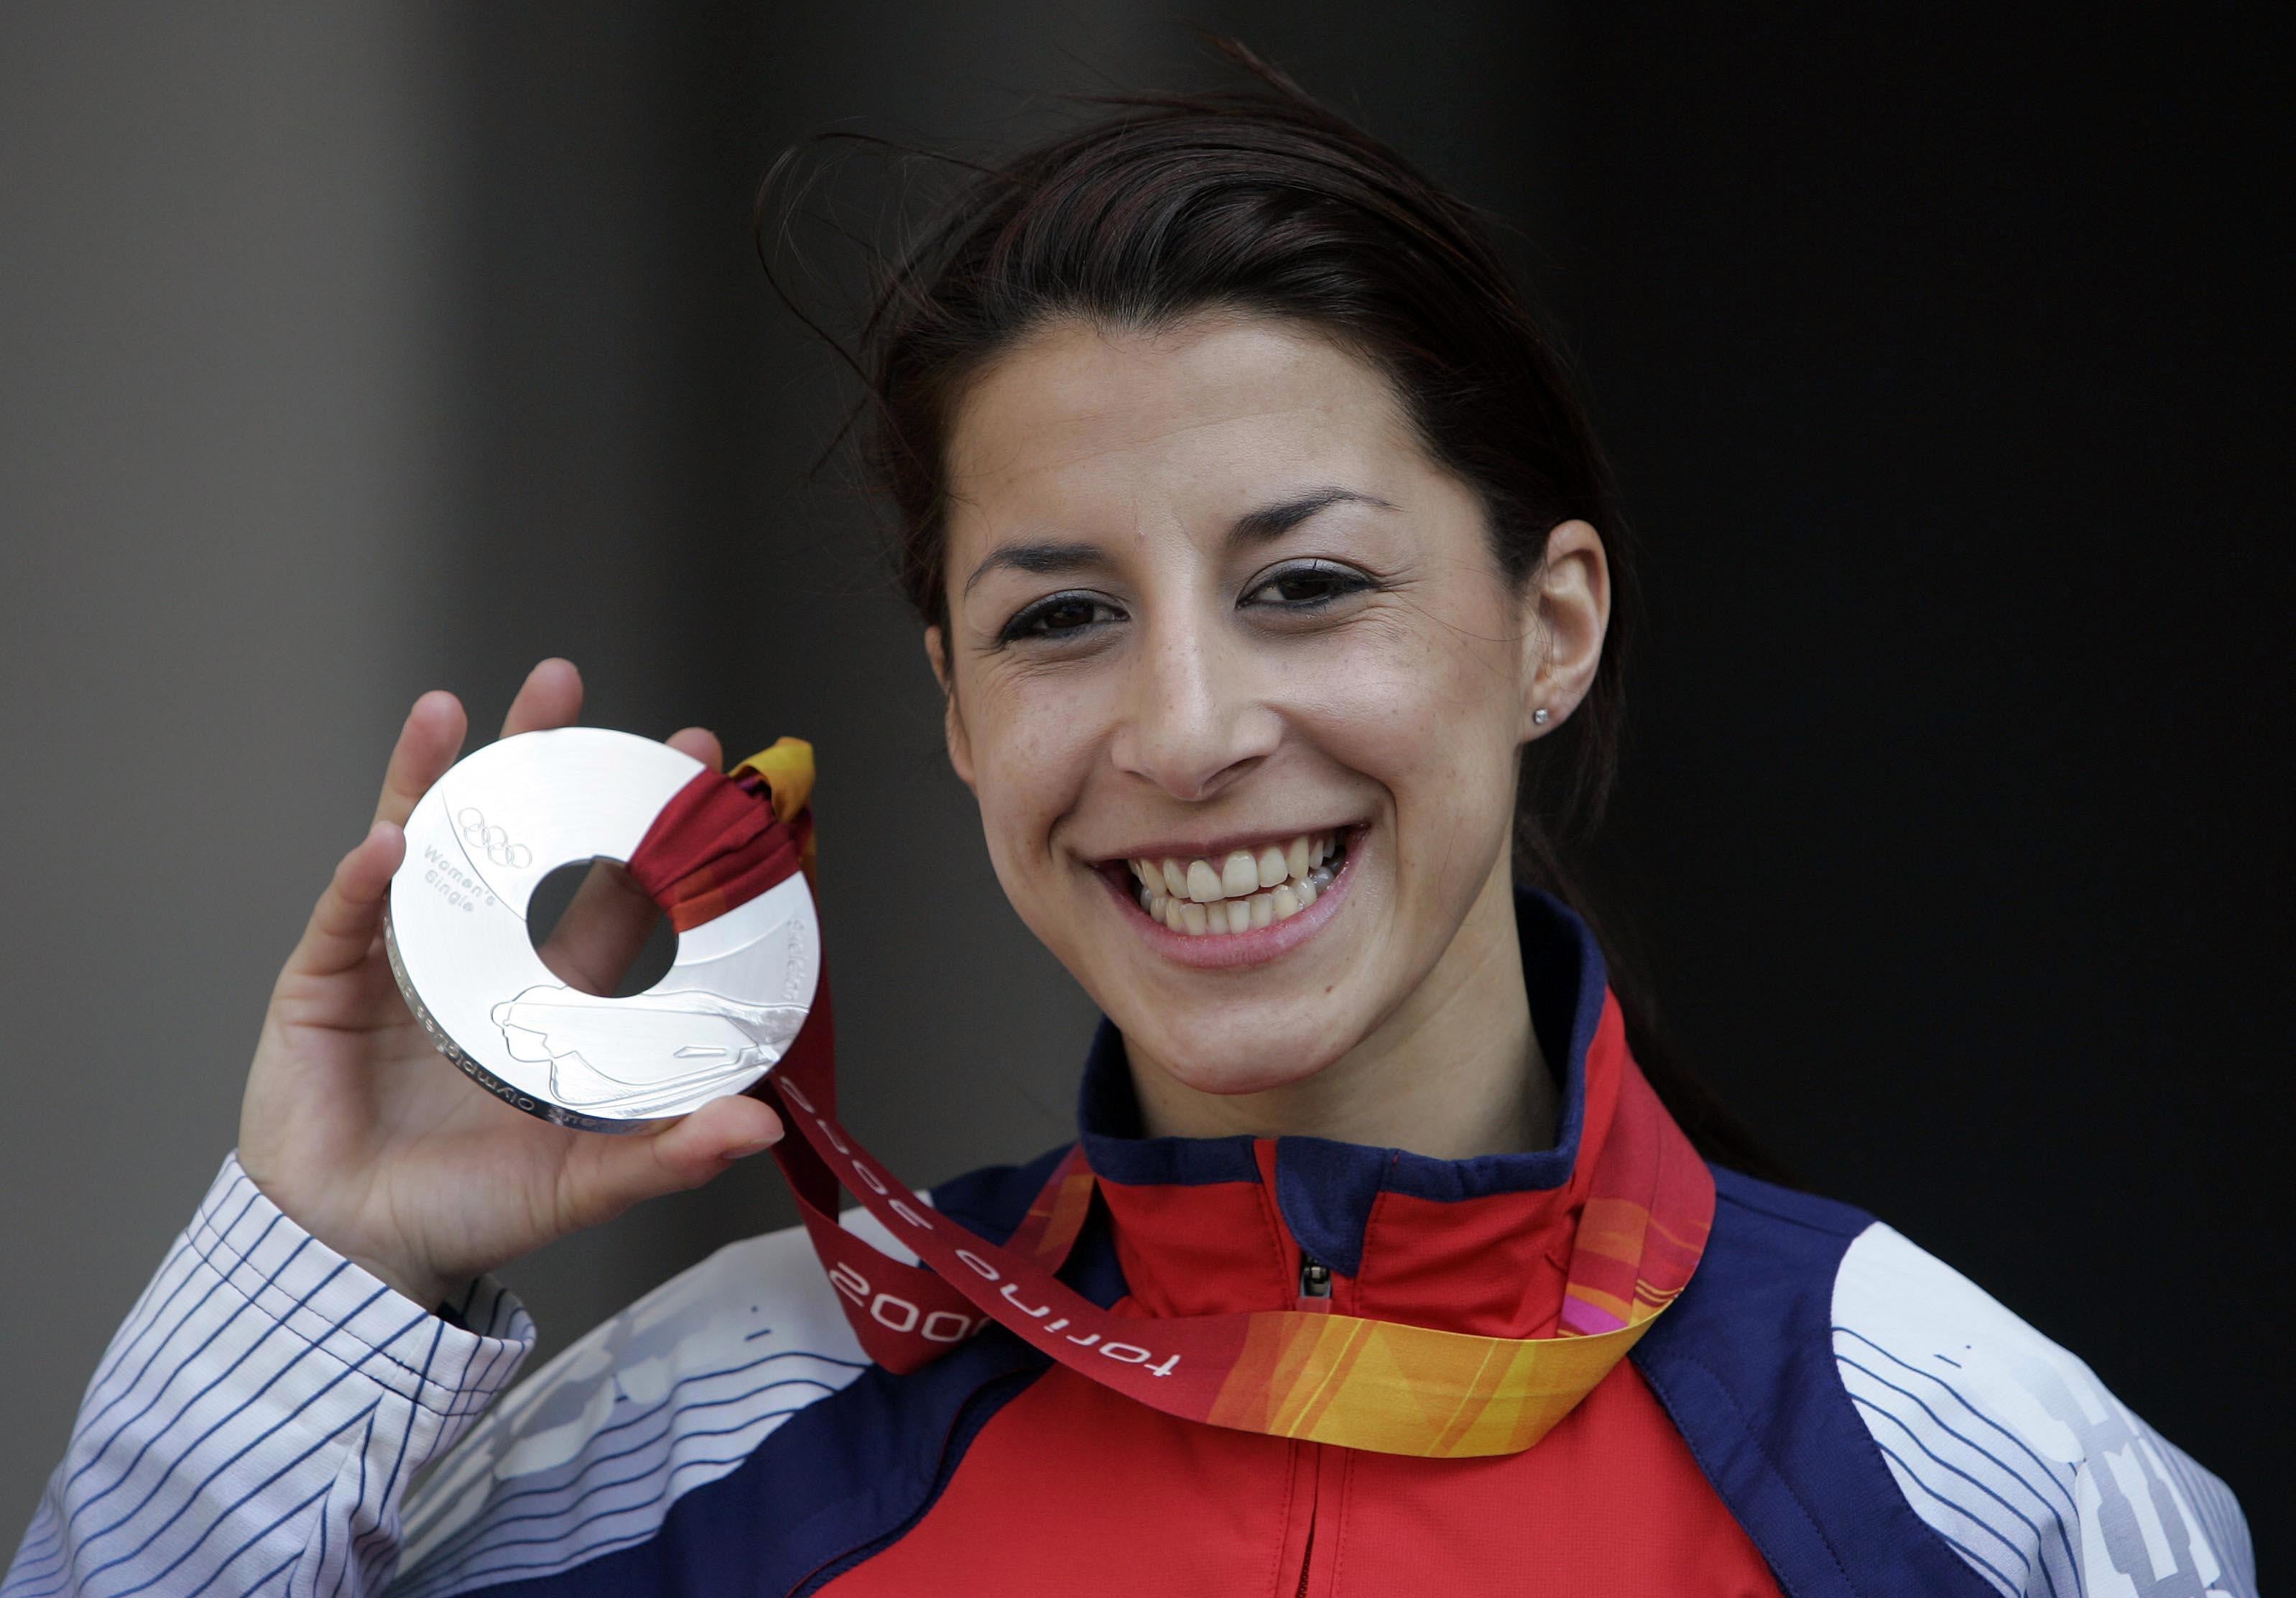 Shelley Rudman with the silver medal she won at the Turin 2006 Games (Andrew Milligan/PA)